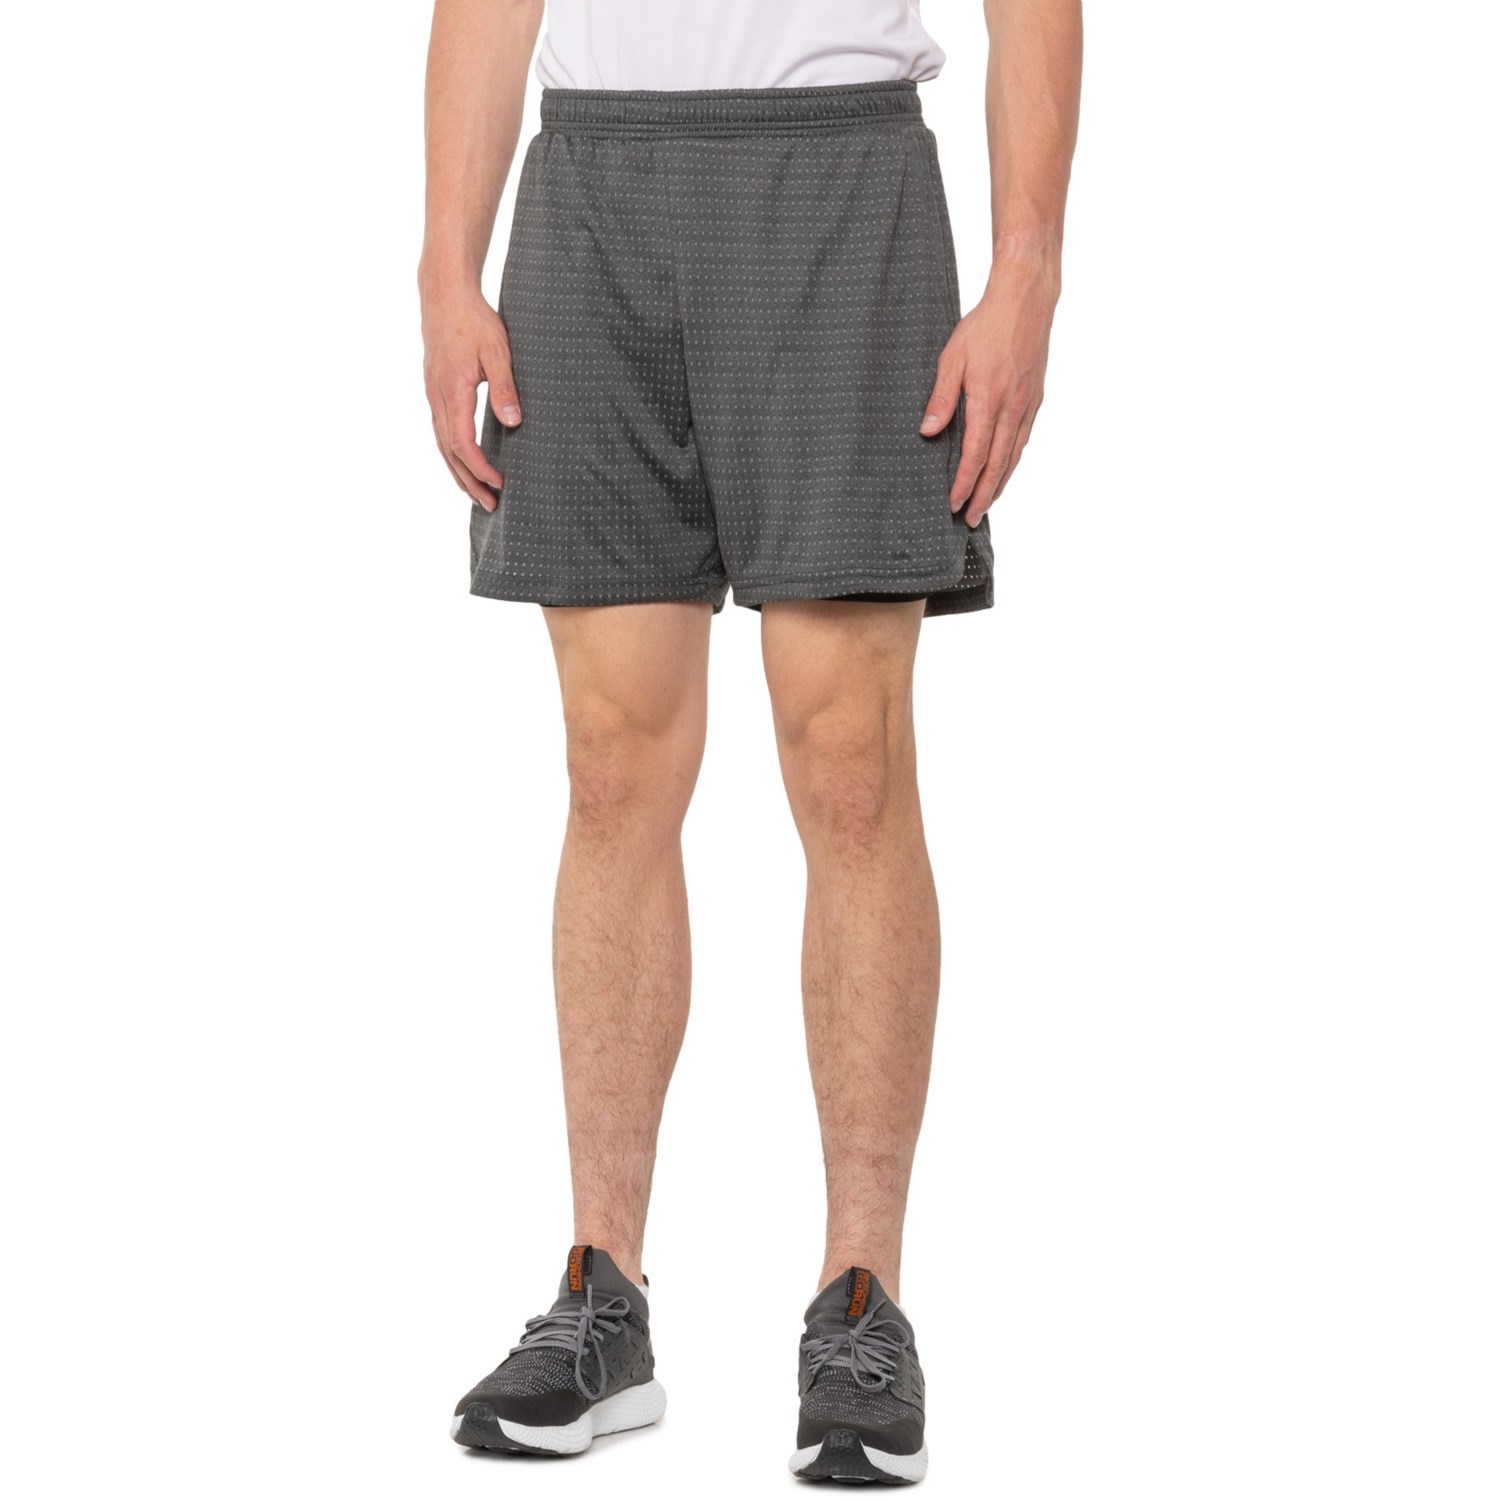 Hind Knit Shorts (For Men) - Save 31%